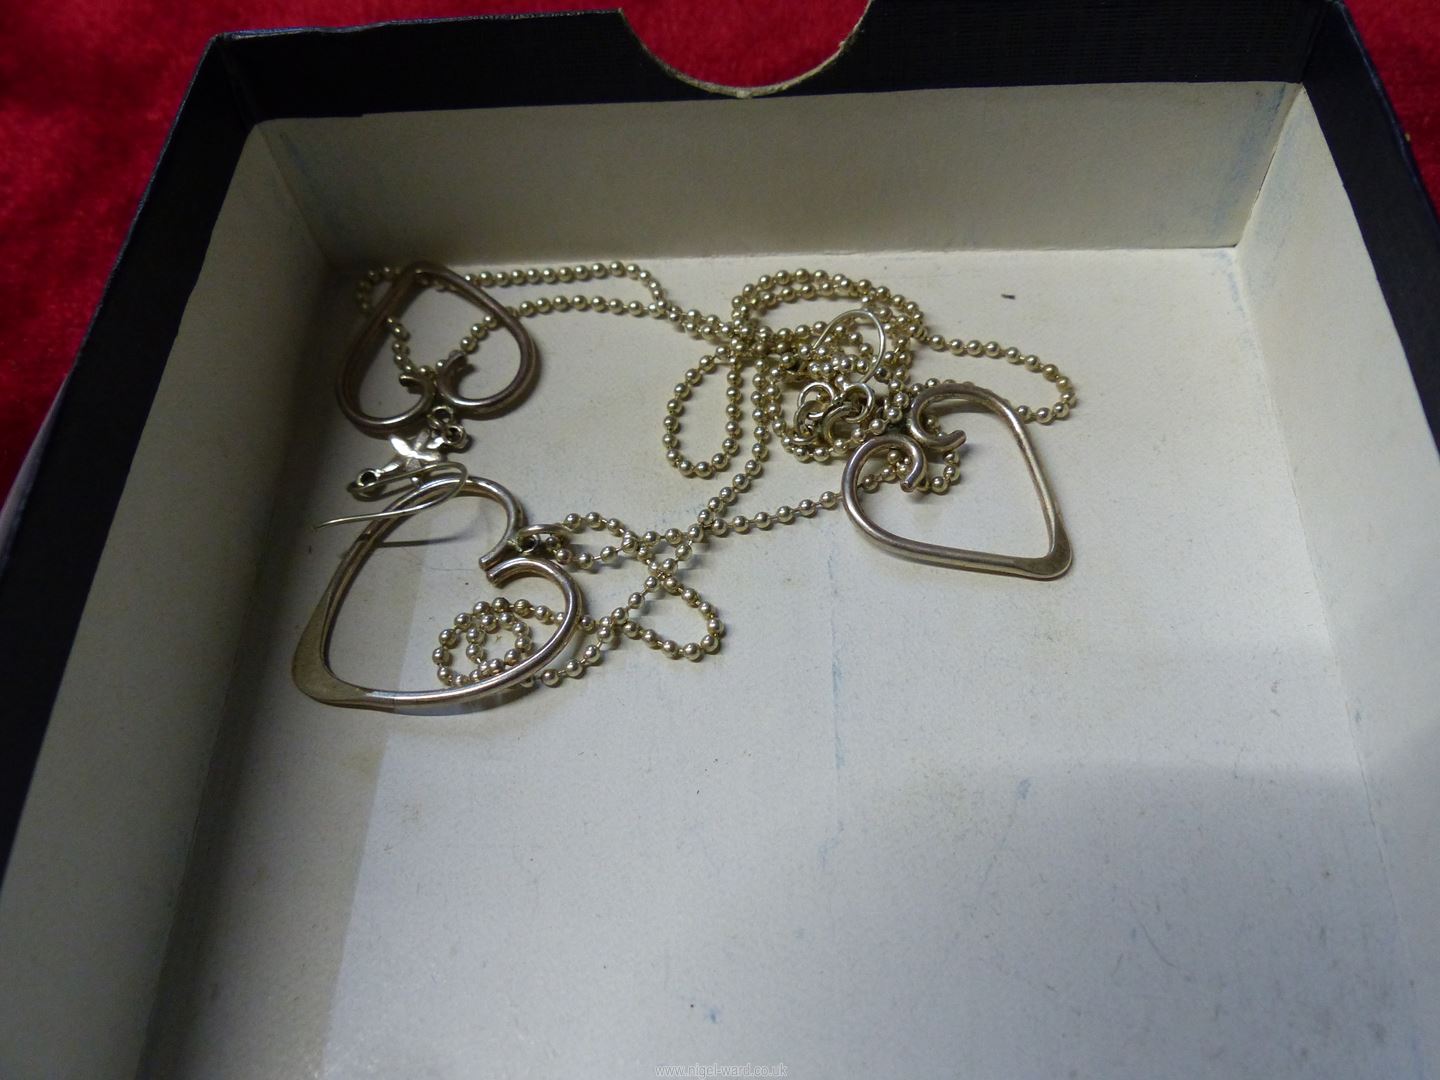 A small quantity of 'Heart' earrings and pendant sets with 925 chains. - Image 3 of 4